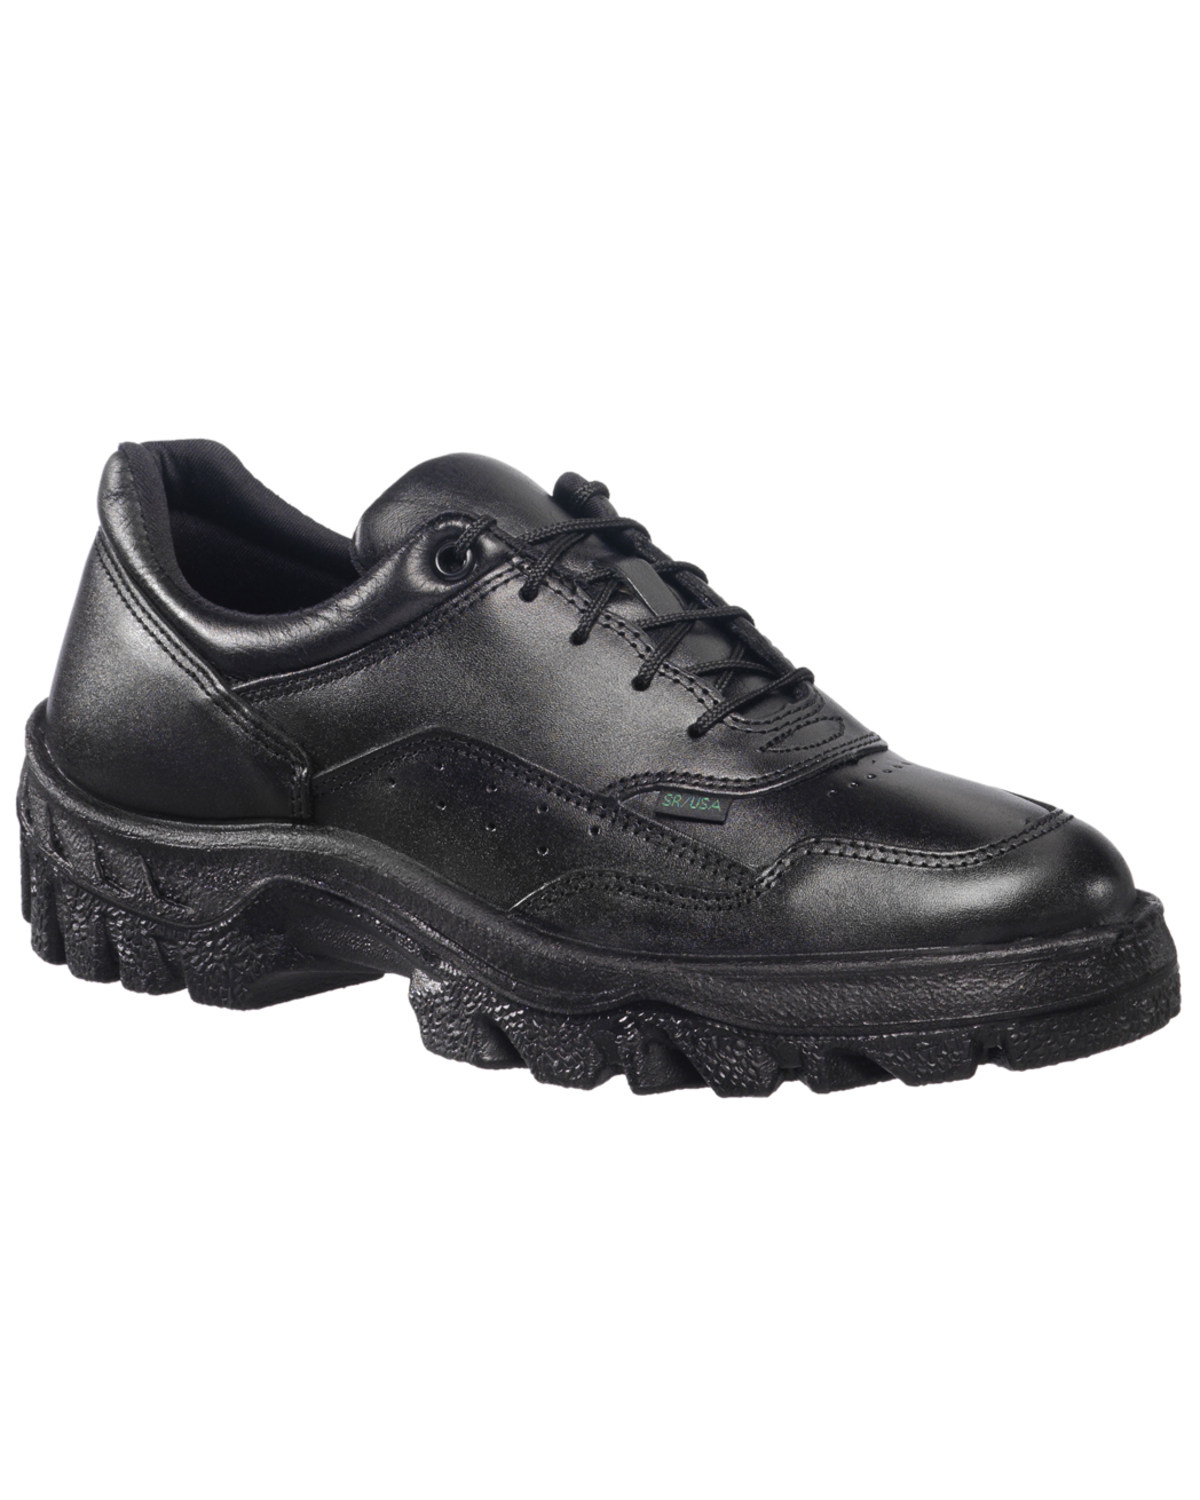 Rocky Women's TMC Postal Approved Oxford Duty Shoes